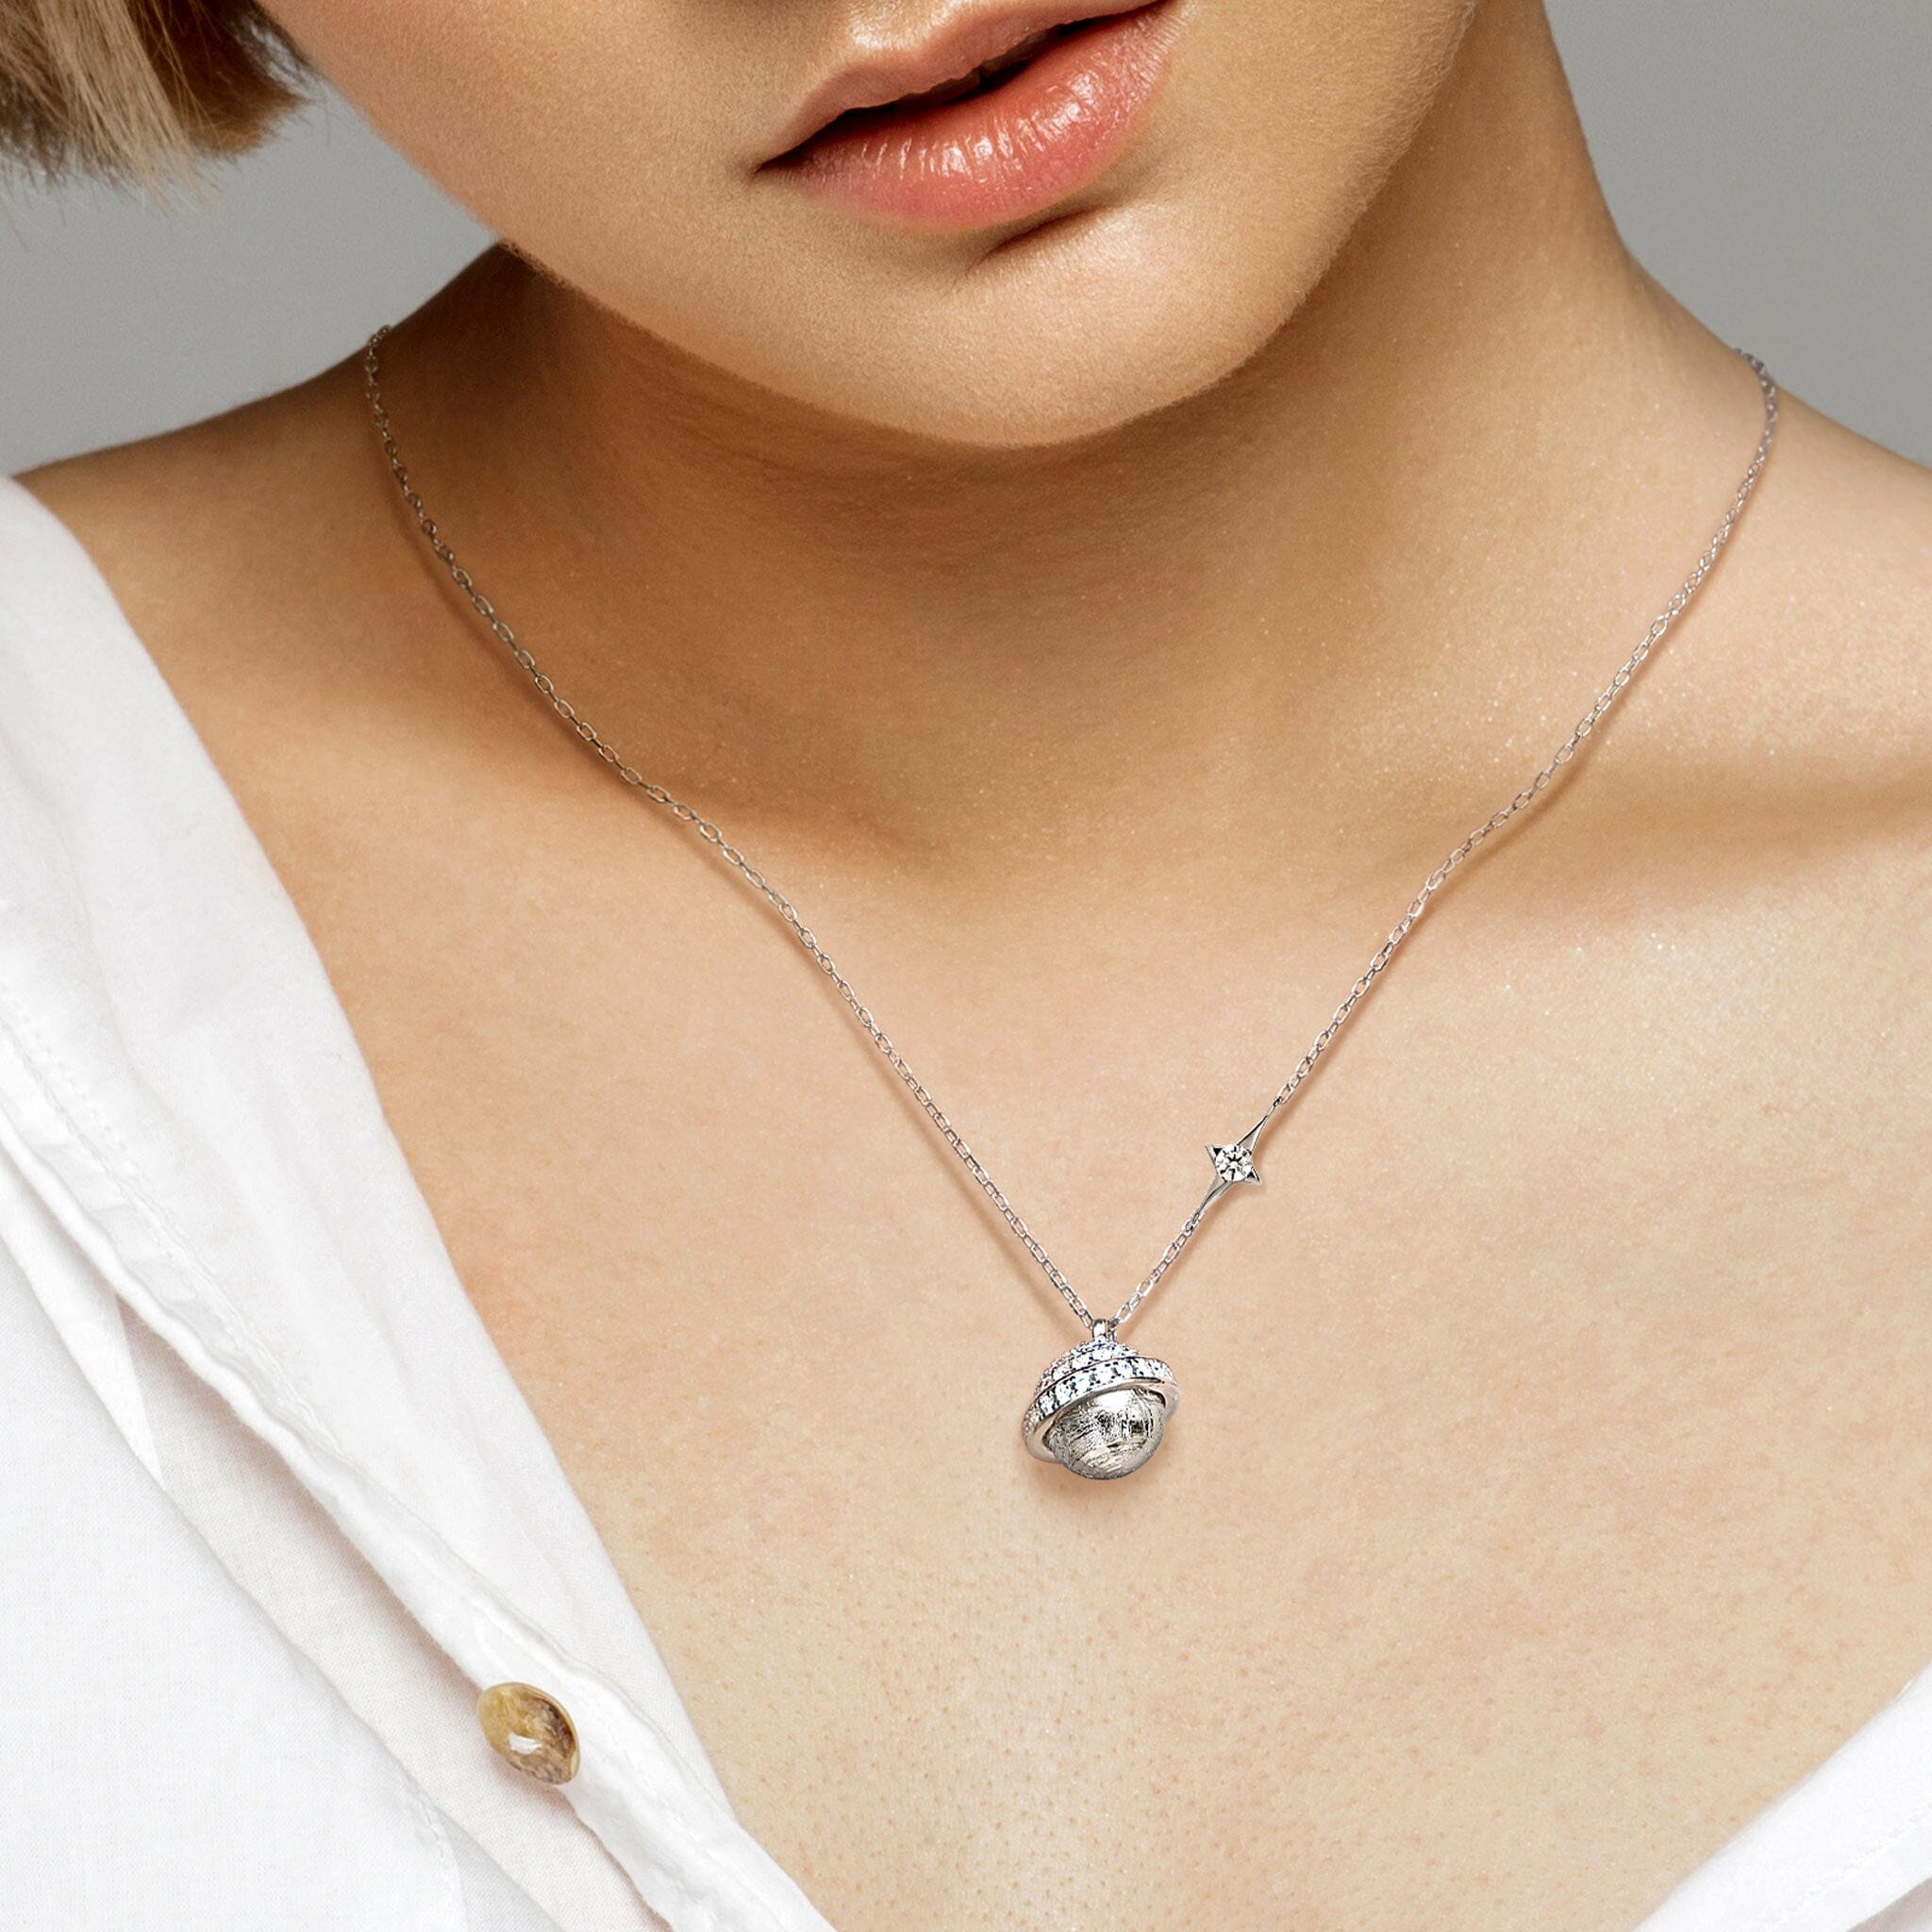 Women's Lunar Silver Necklace with Meteorite Necklaces WAA FASHION GROUP 